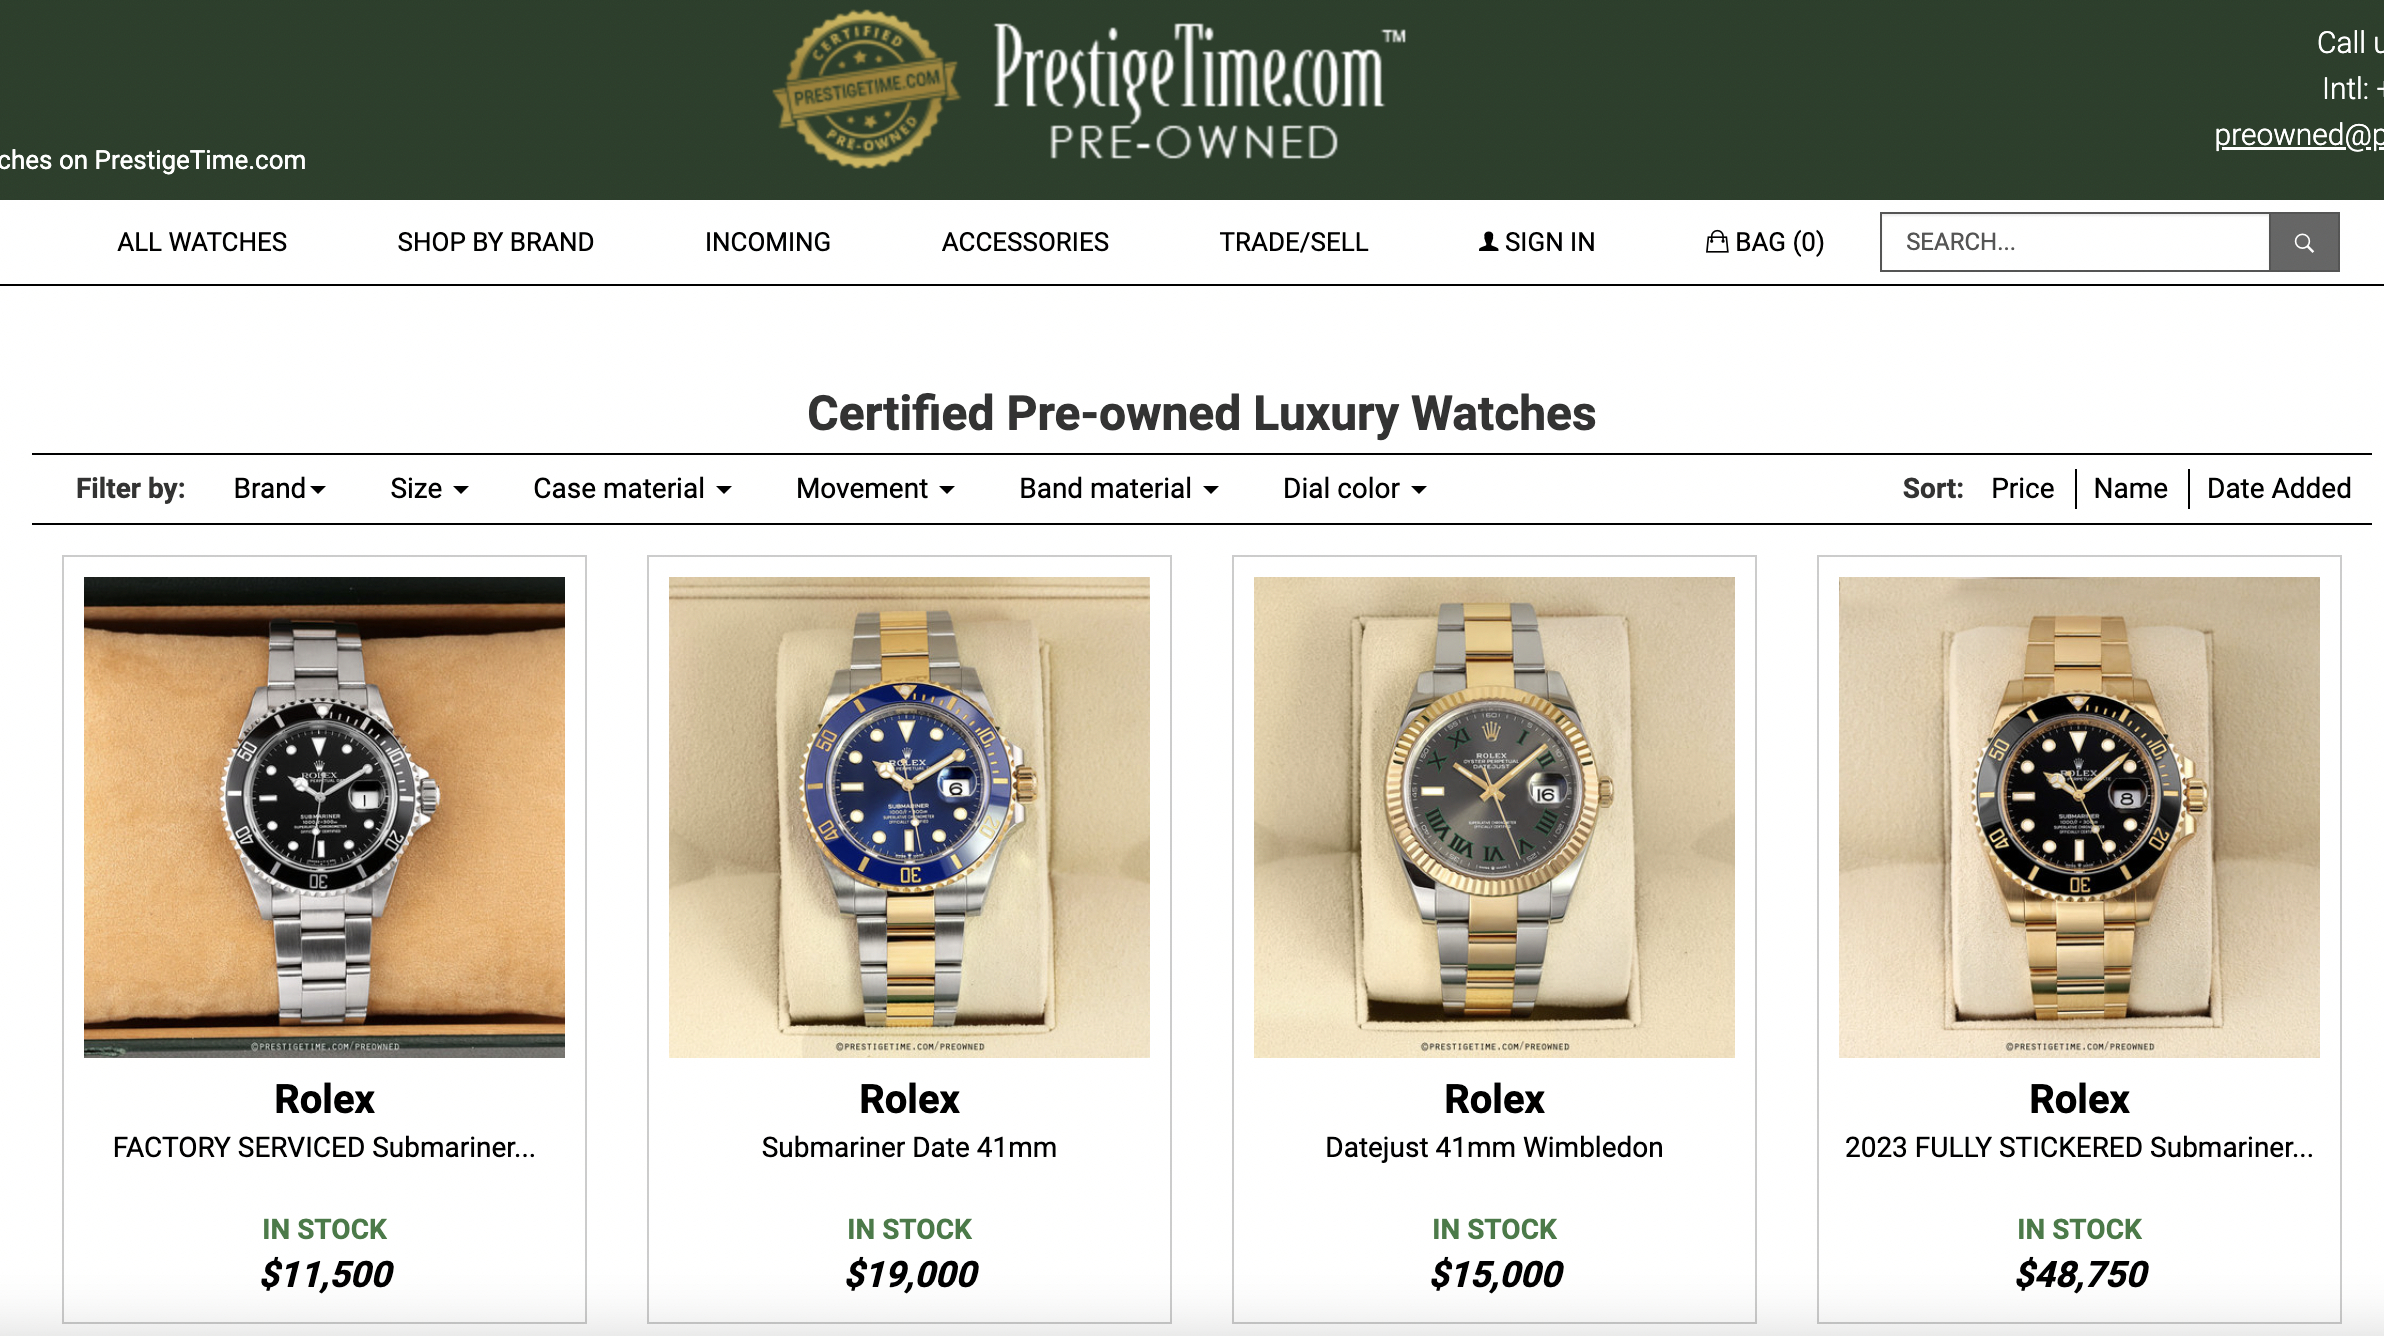 PrestigeTime pre-owned luxury watches offering